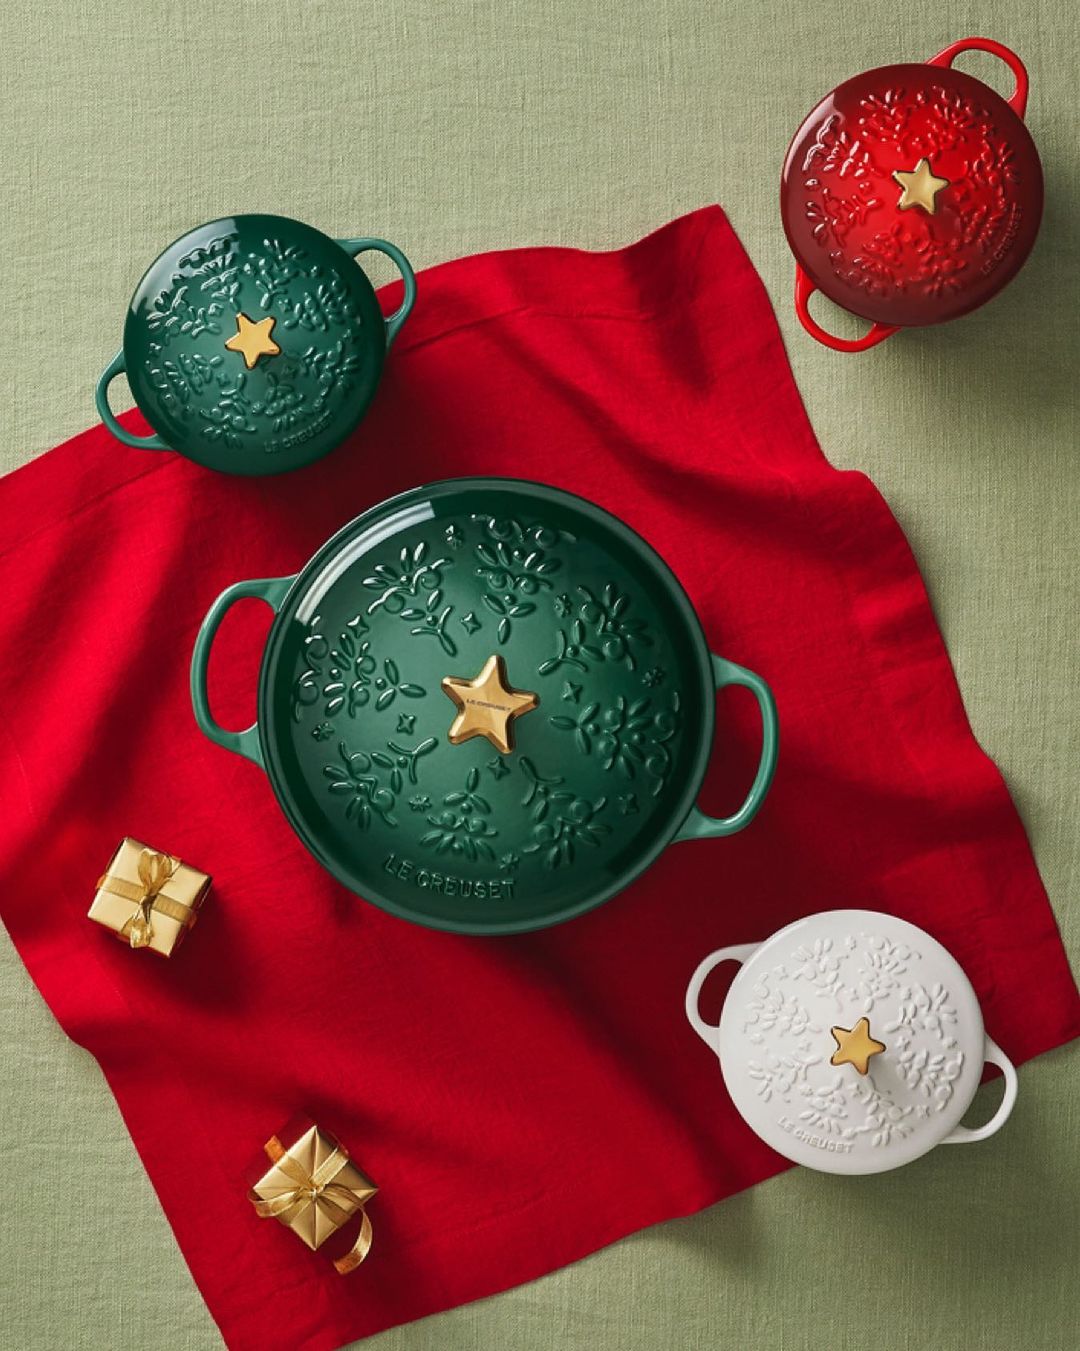 Williams Sanoma; Festive cookware set; yorkdale; Last minute gift guide; 2023